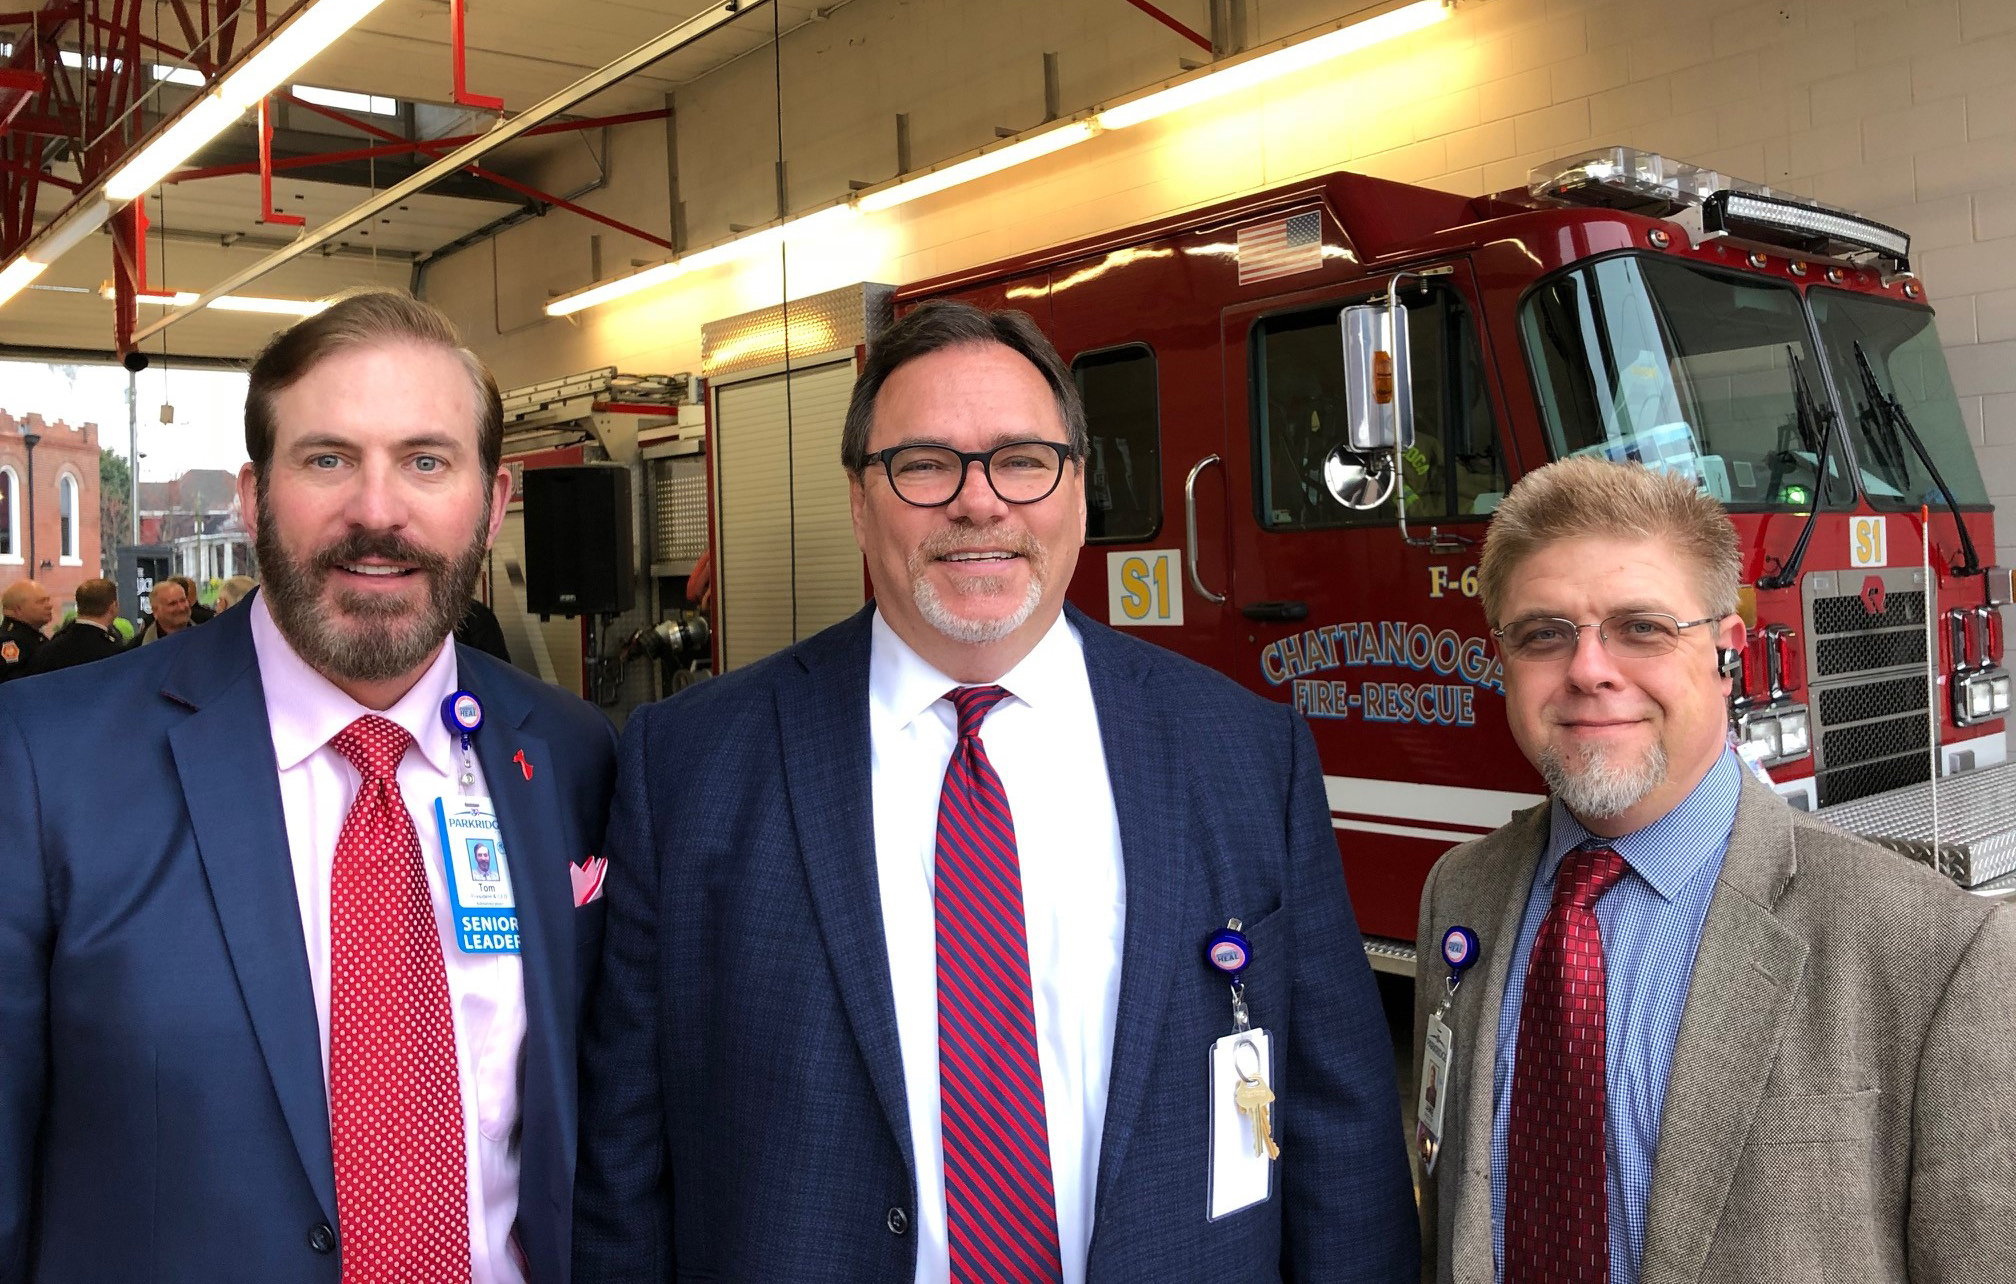 Three men in suits and ties standing in front of a firetruck